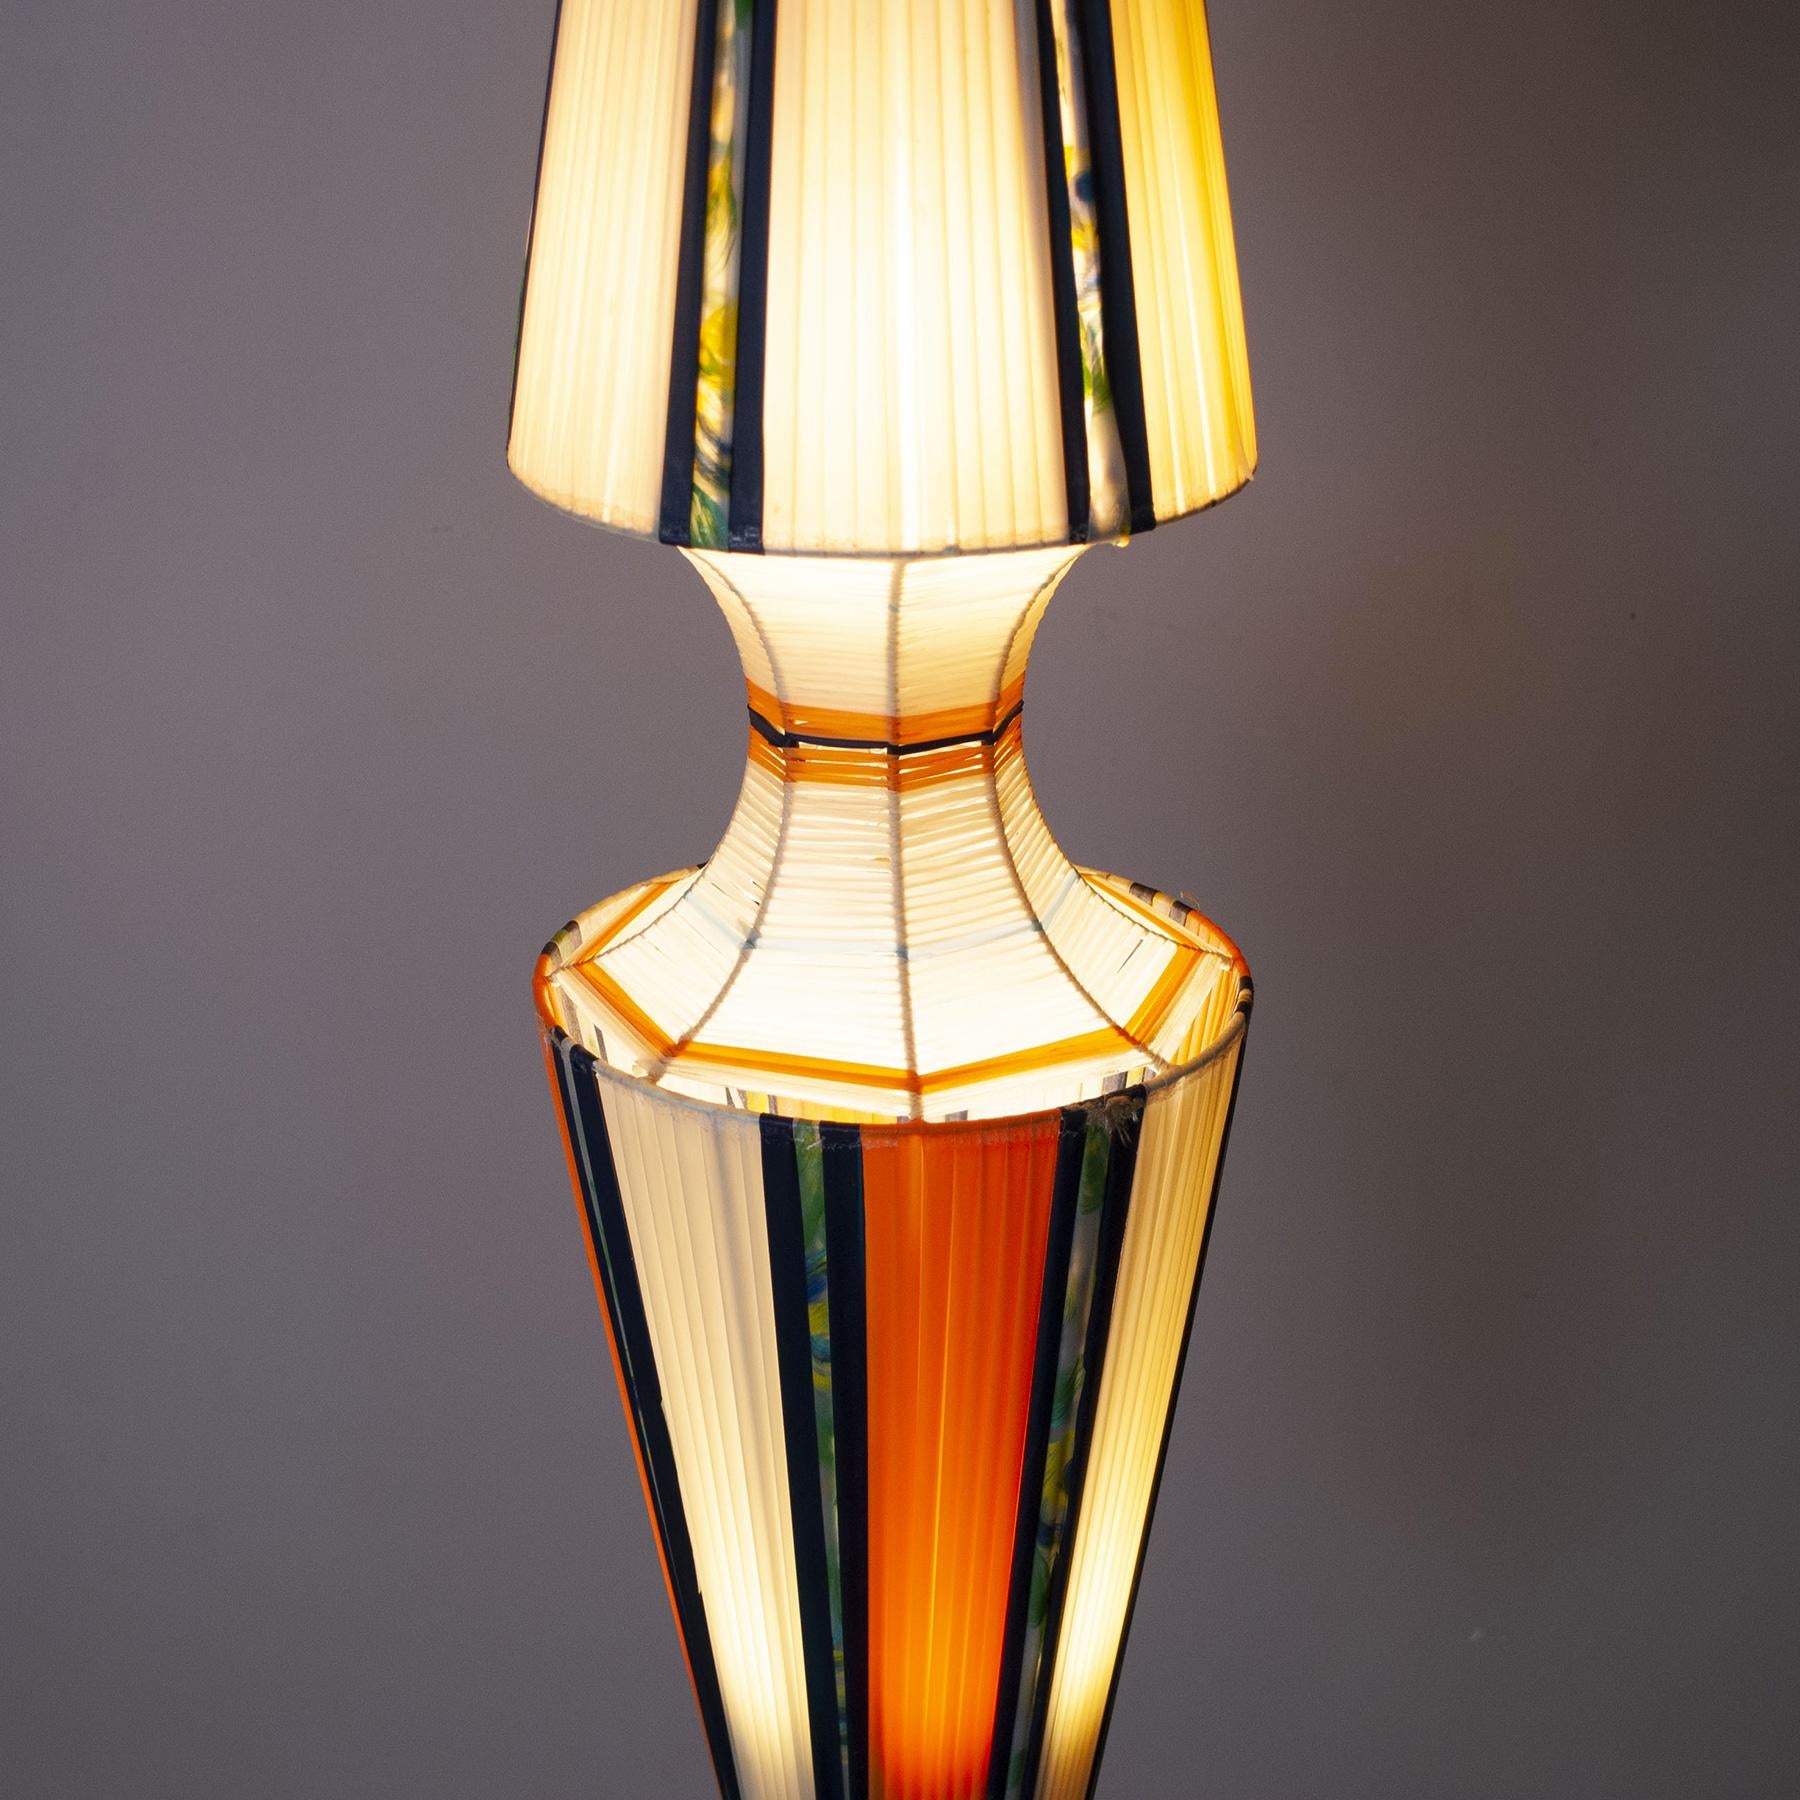 Metal Italian Production Floor Lamp, Late 1950s For Sale